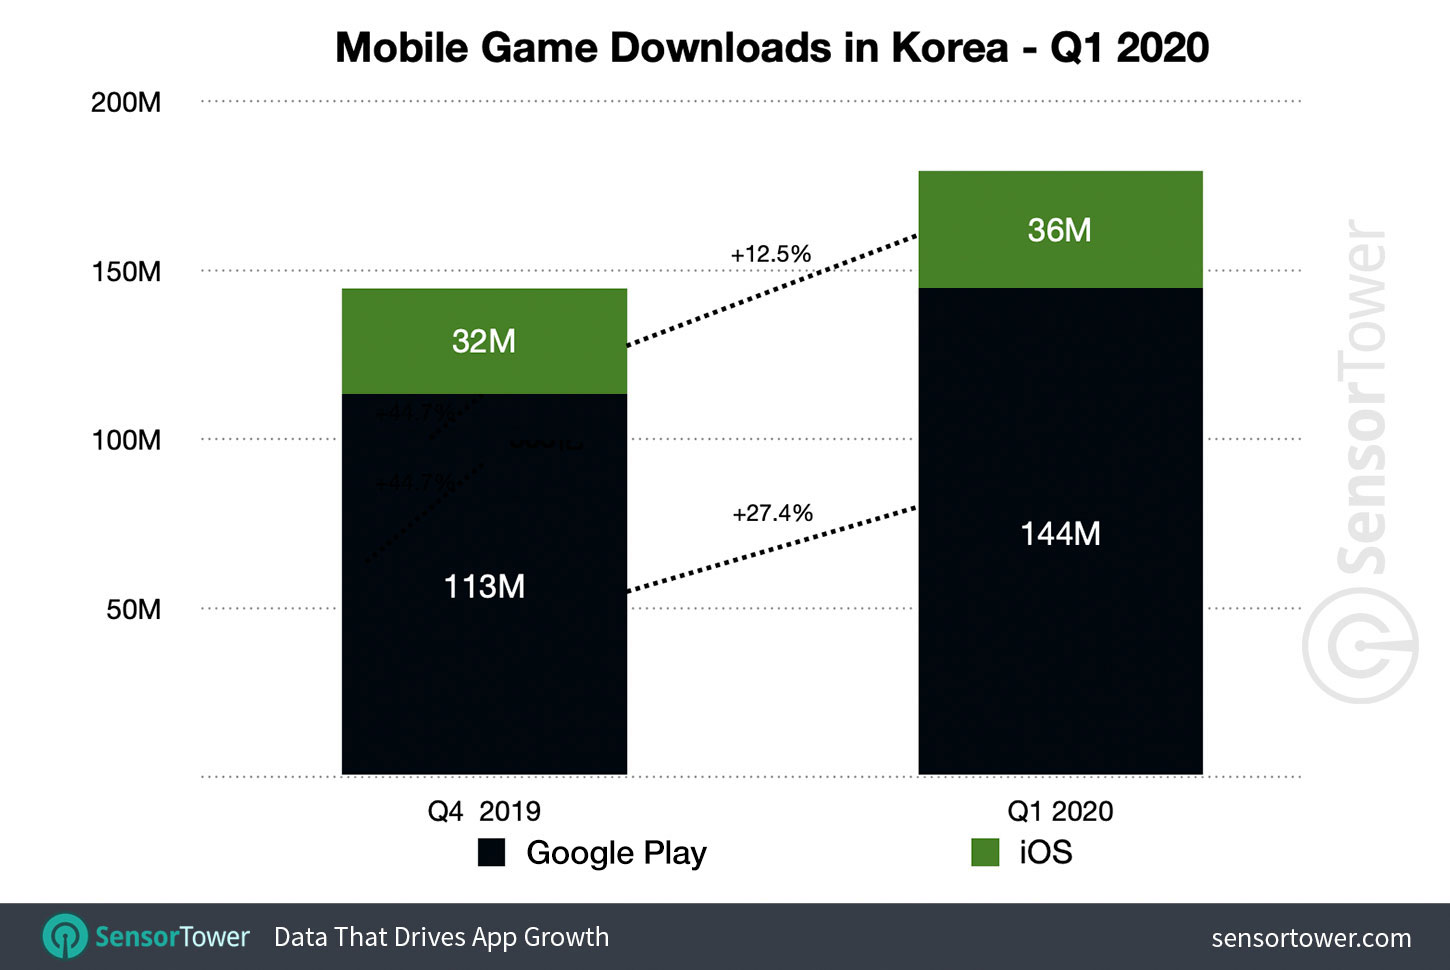 South Korea Mobile Game Downloads for Q1 2020